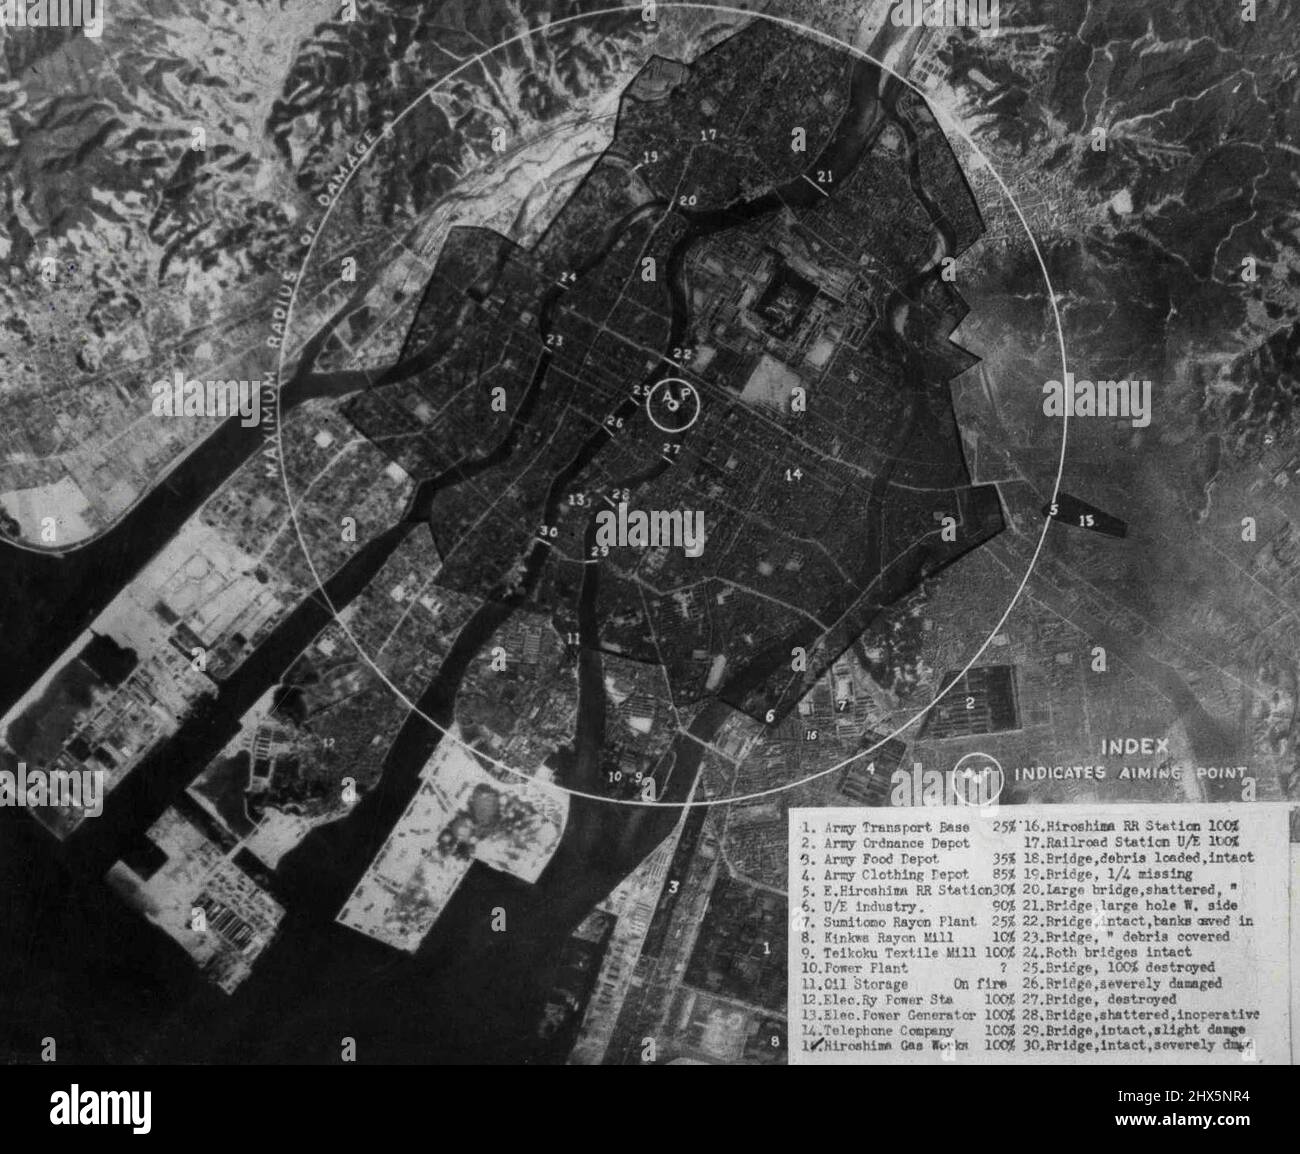 Hiroshima Area That Sustained Damage In First Atomic Bomb Attack - Photo-diagram issued by the Army Air Forces. The circle is drawn on a diameter of 19,000 feet with the devastated sections *****, according to information based on Air Intelligence parts. The Key to the numbers follow: 1-Army Transport base; 2-Army ordnance ***** Army food depot; 4-Army clothing depot; 5-E. Hiroshima ***** - Unidentified industry; 7-Sumitomo rayon plant; 8- Kinkwa ***** 19- Teikoku station; 13- Electric power generator; 14-Telephone ***** 15-Gas works; 16-Hiroshima RR station; 17-Unidentified ***** 18-Bridge, Stock Photo